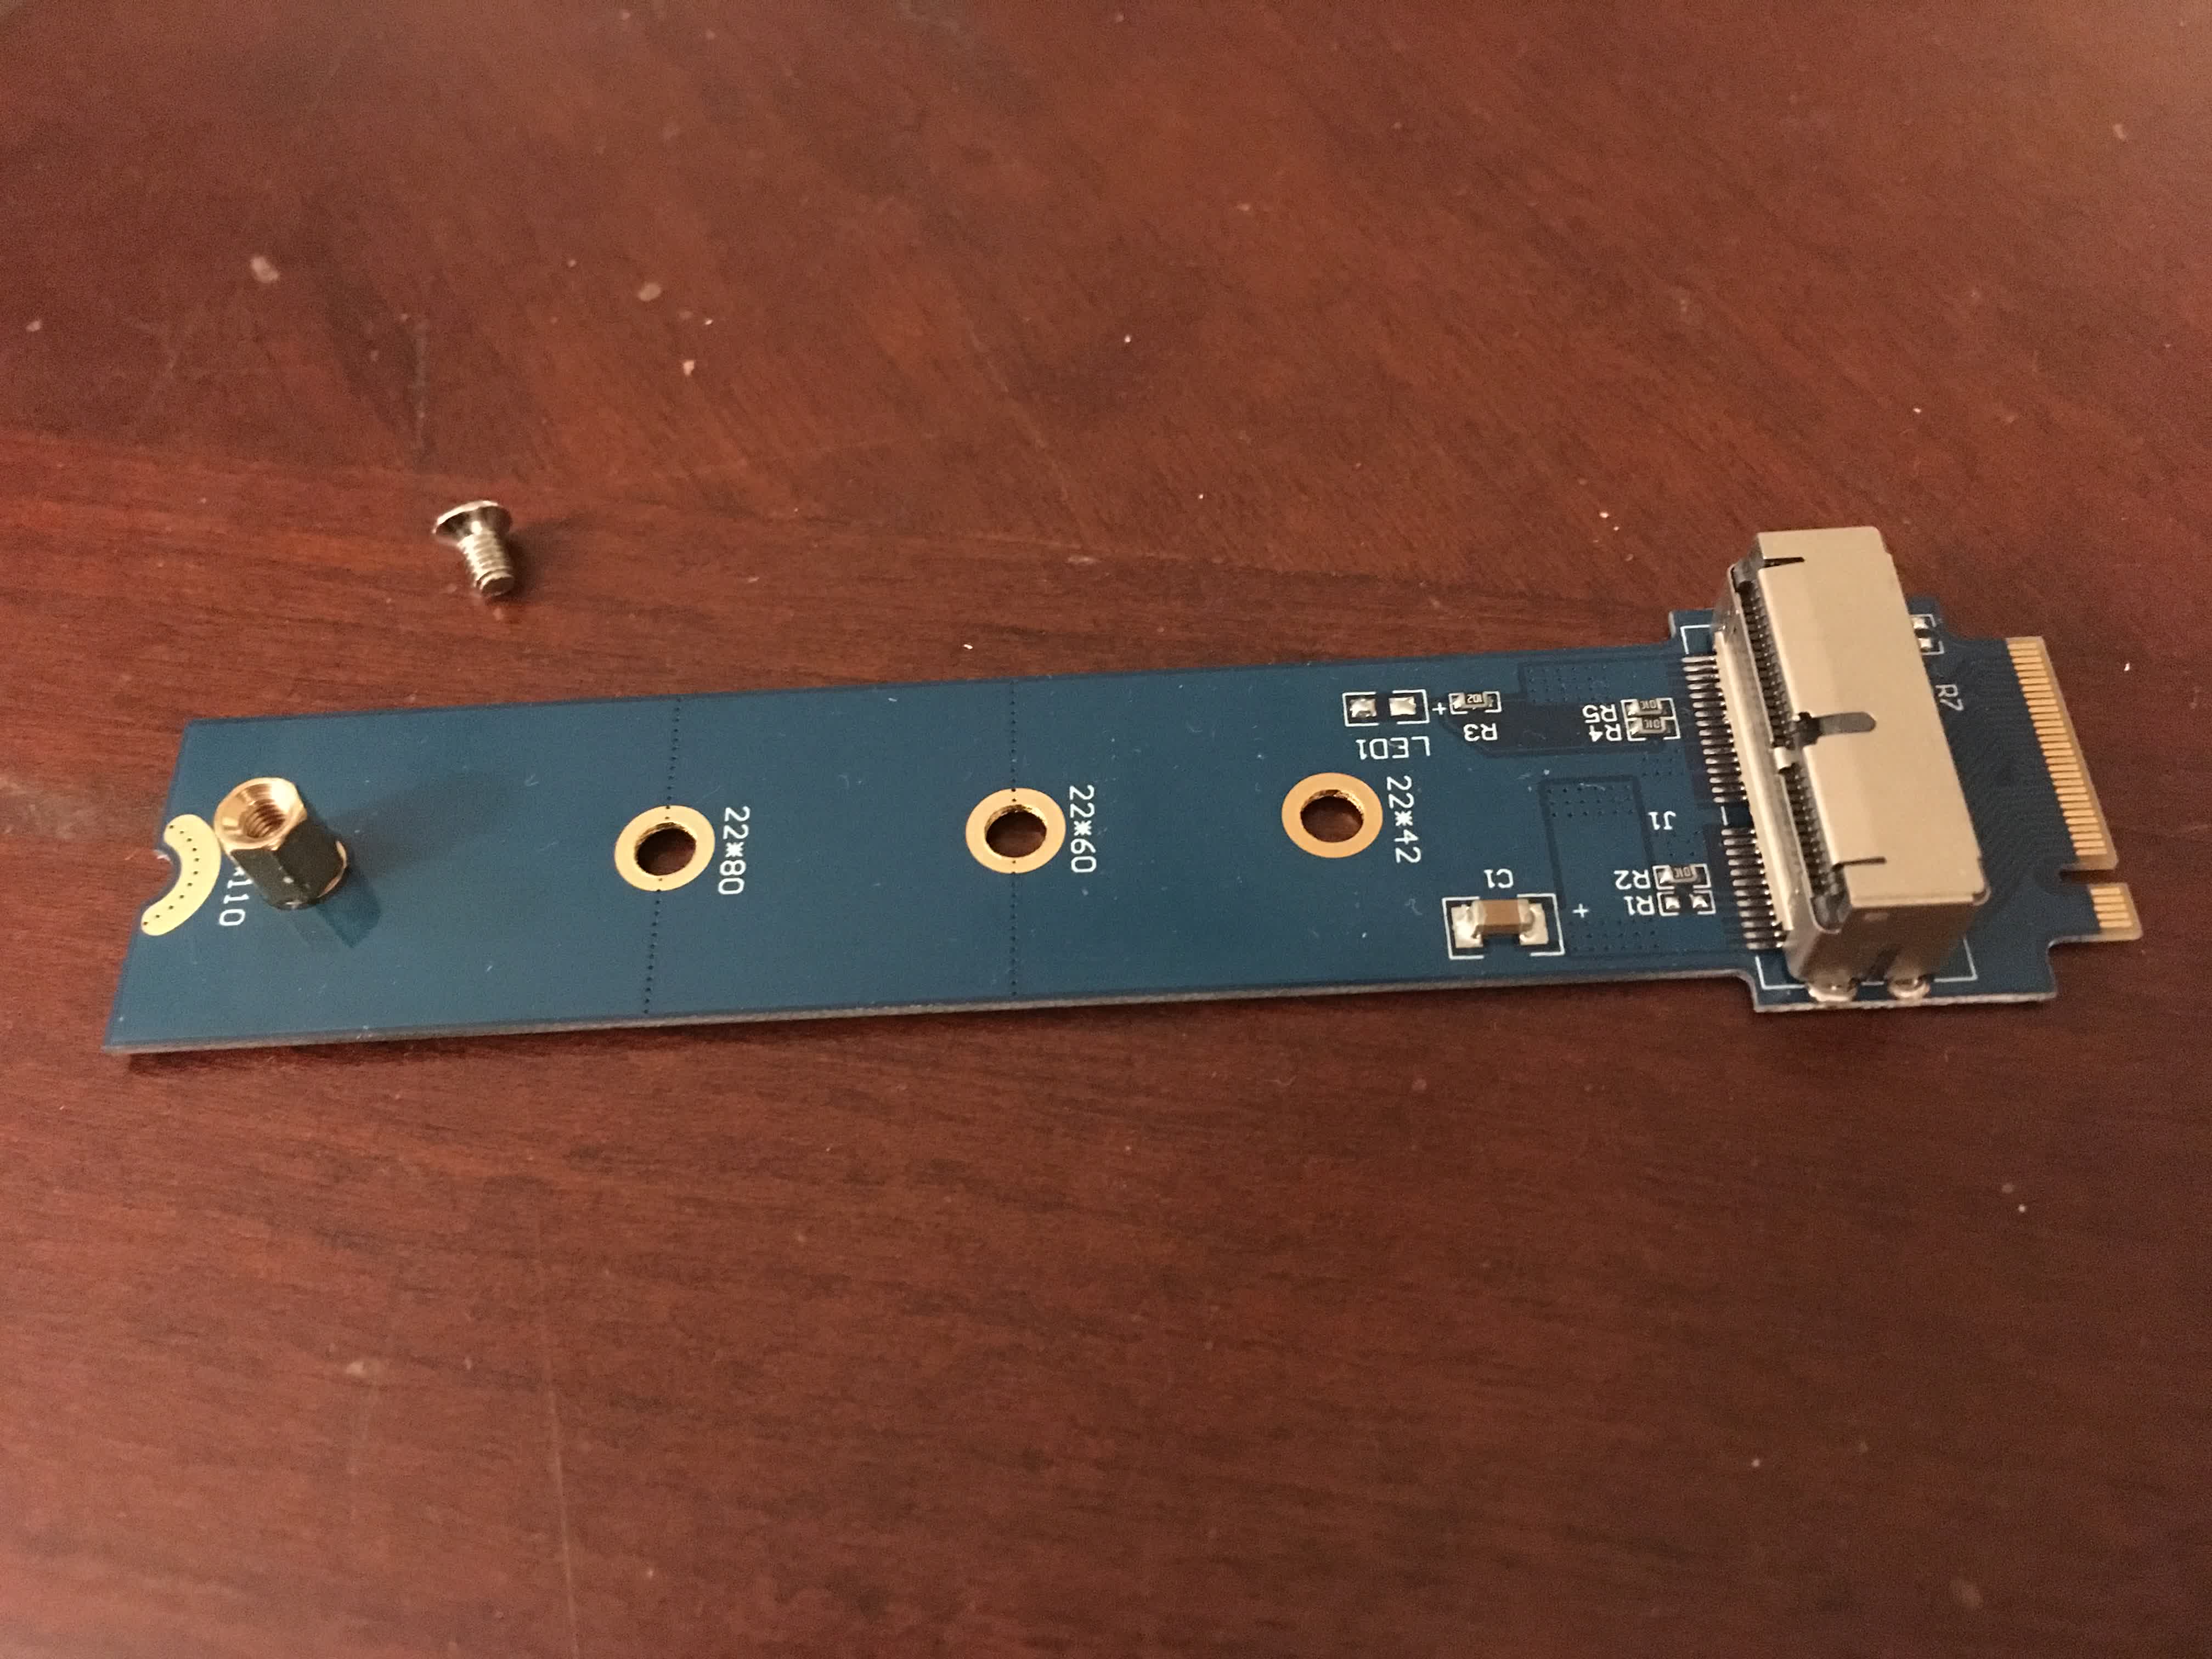 Adapter without the SSD in it